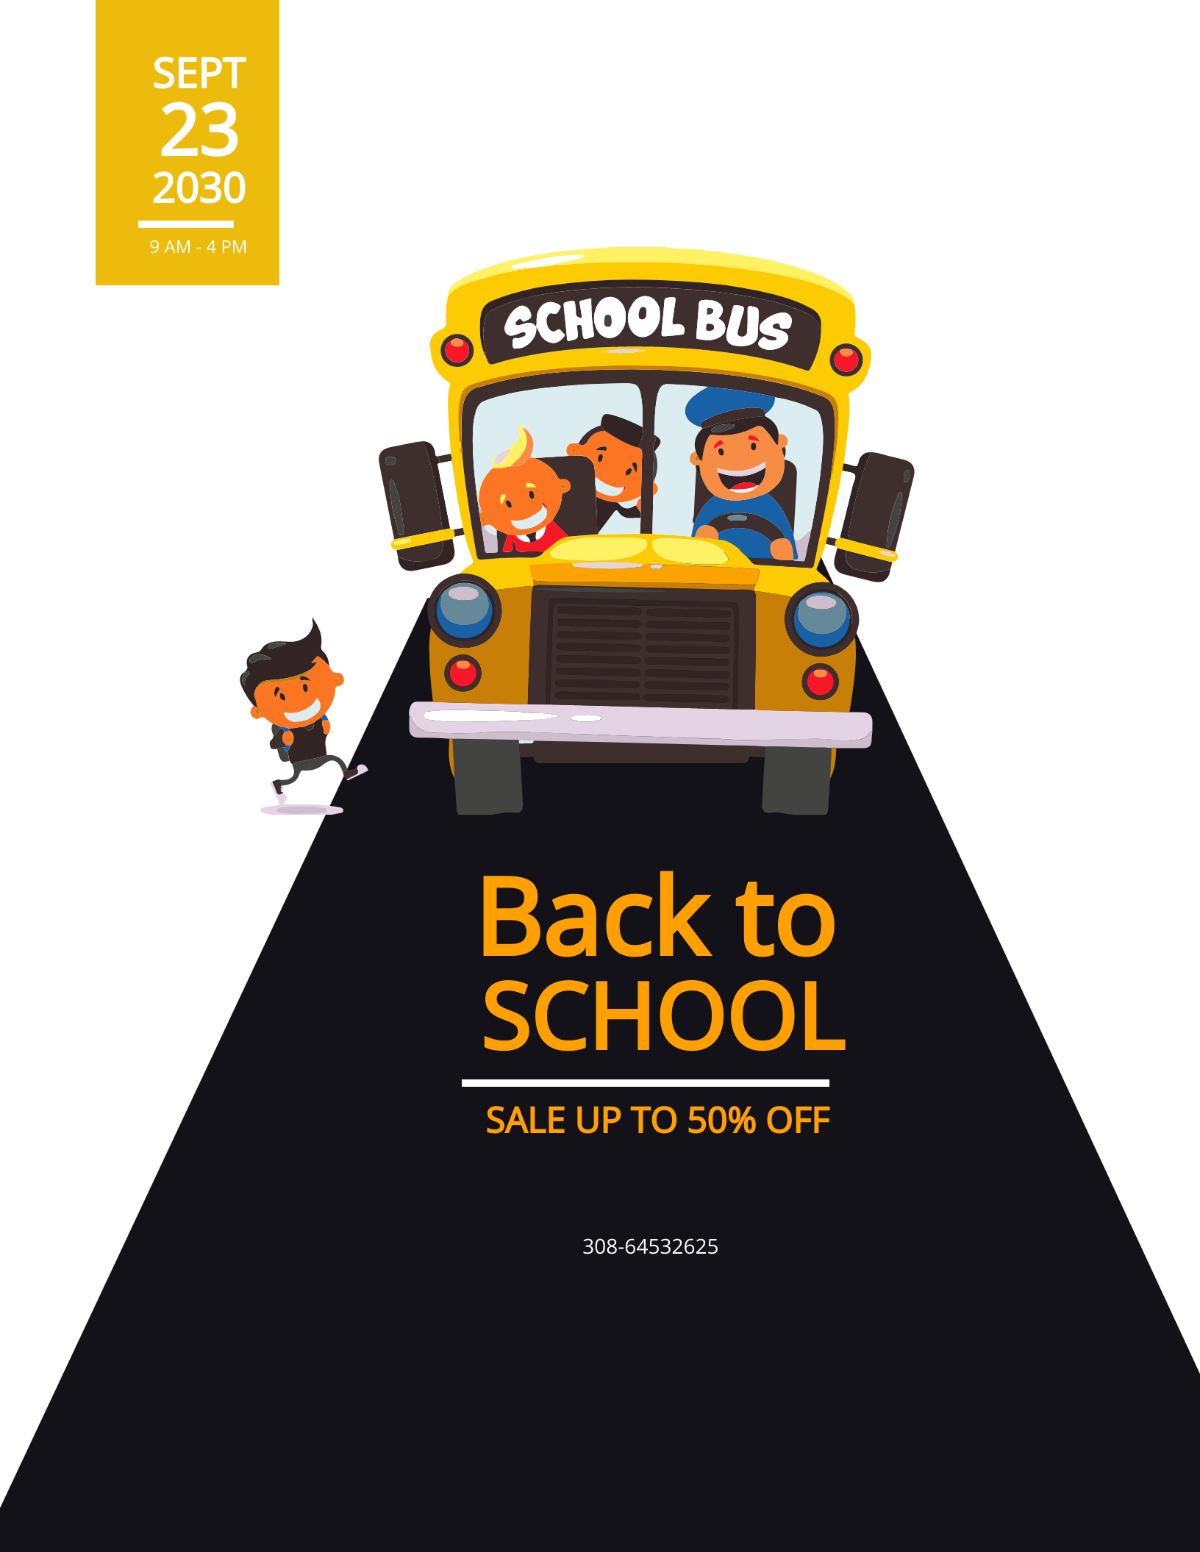 Back To School Flyer Design Template